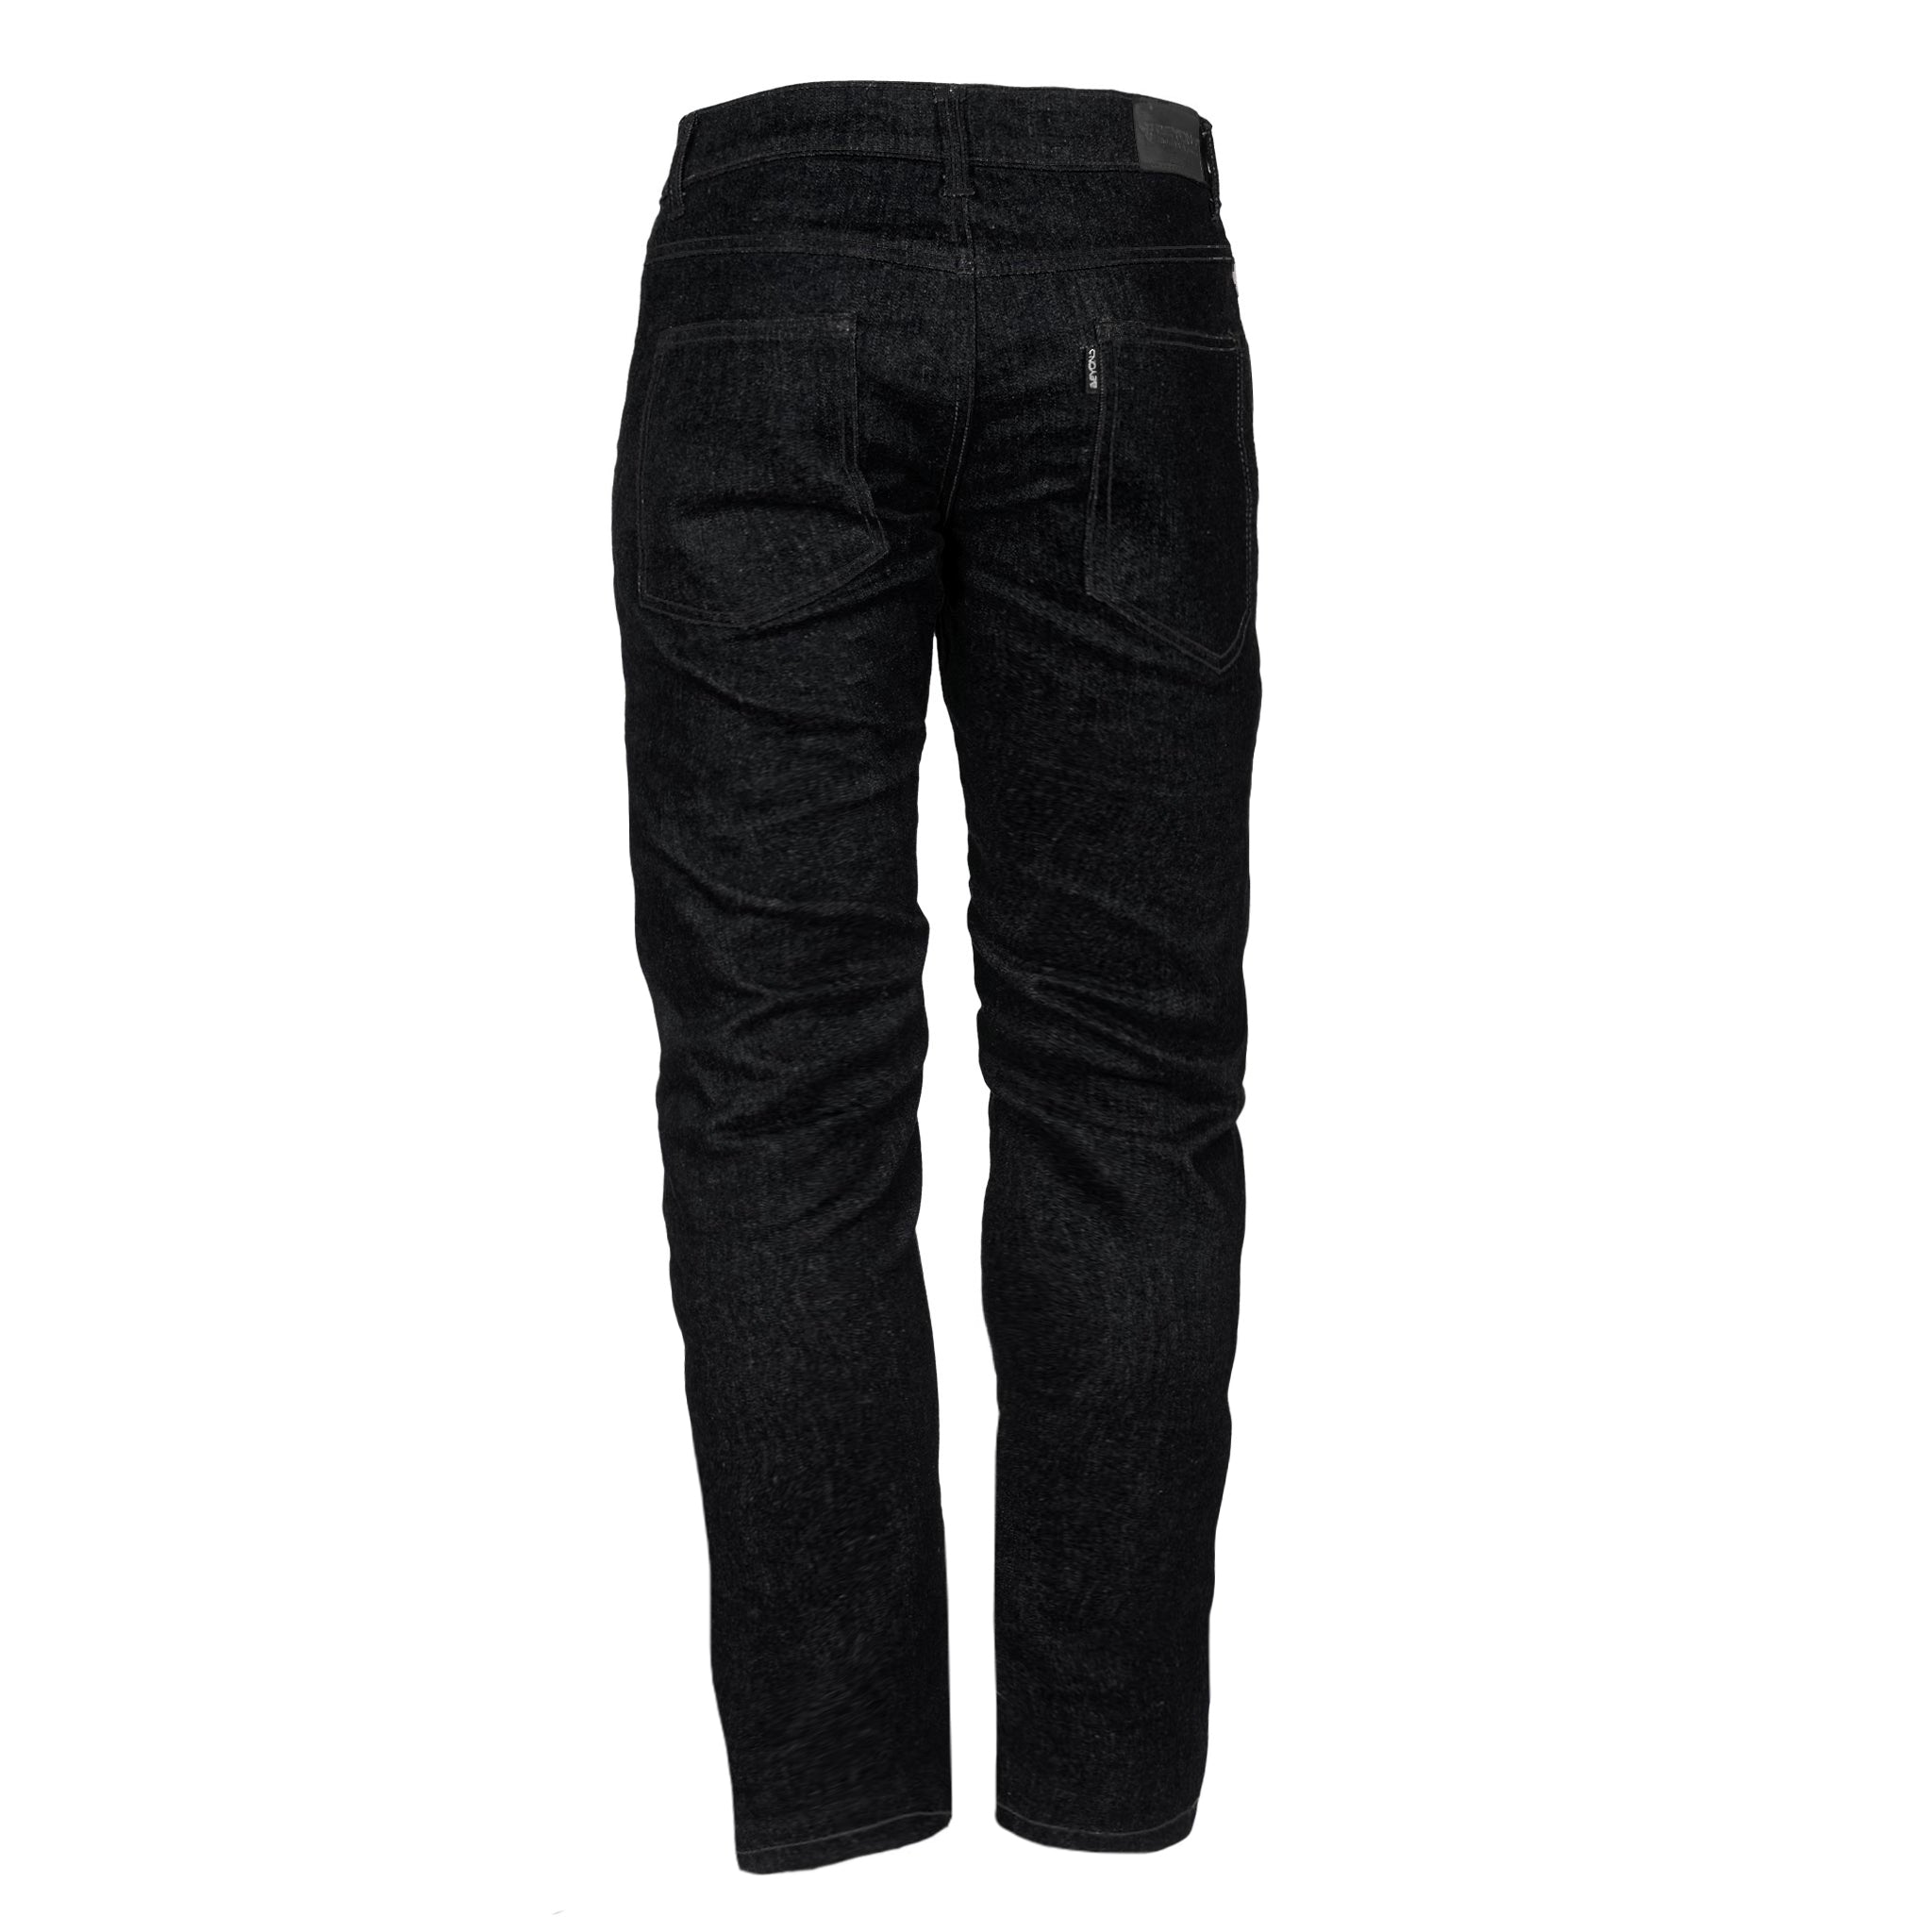 SALE Relaxed Fit Protective Jeans - Black with Pads